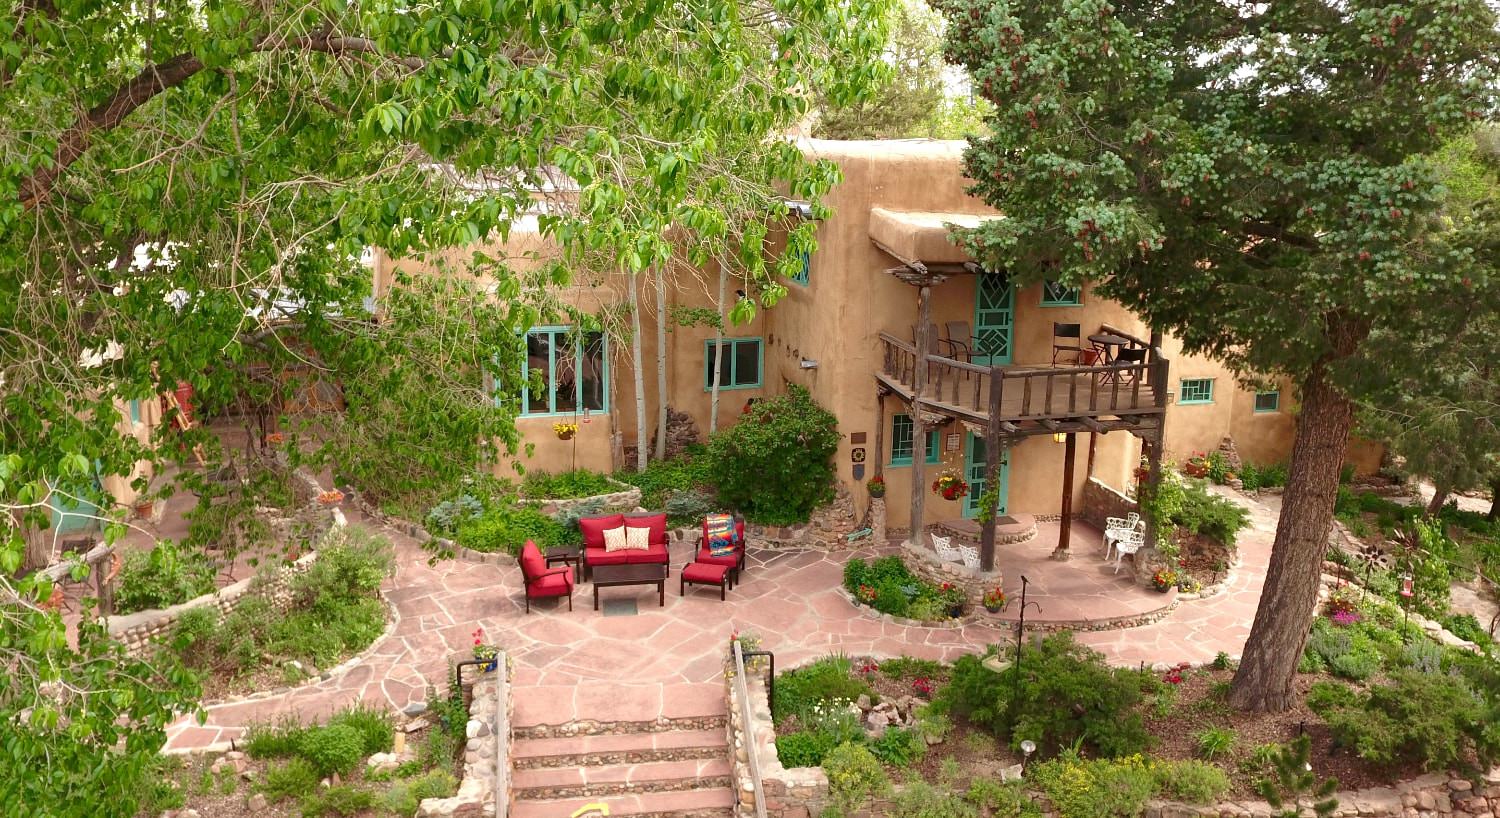 Exterior view of the property surrounded by large green trees, green vegetation, stone walkways, large patio, and red cushioned patio furniture